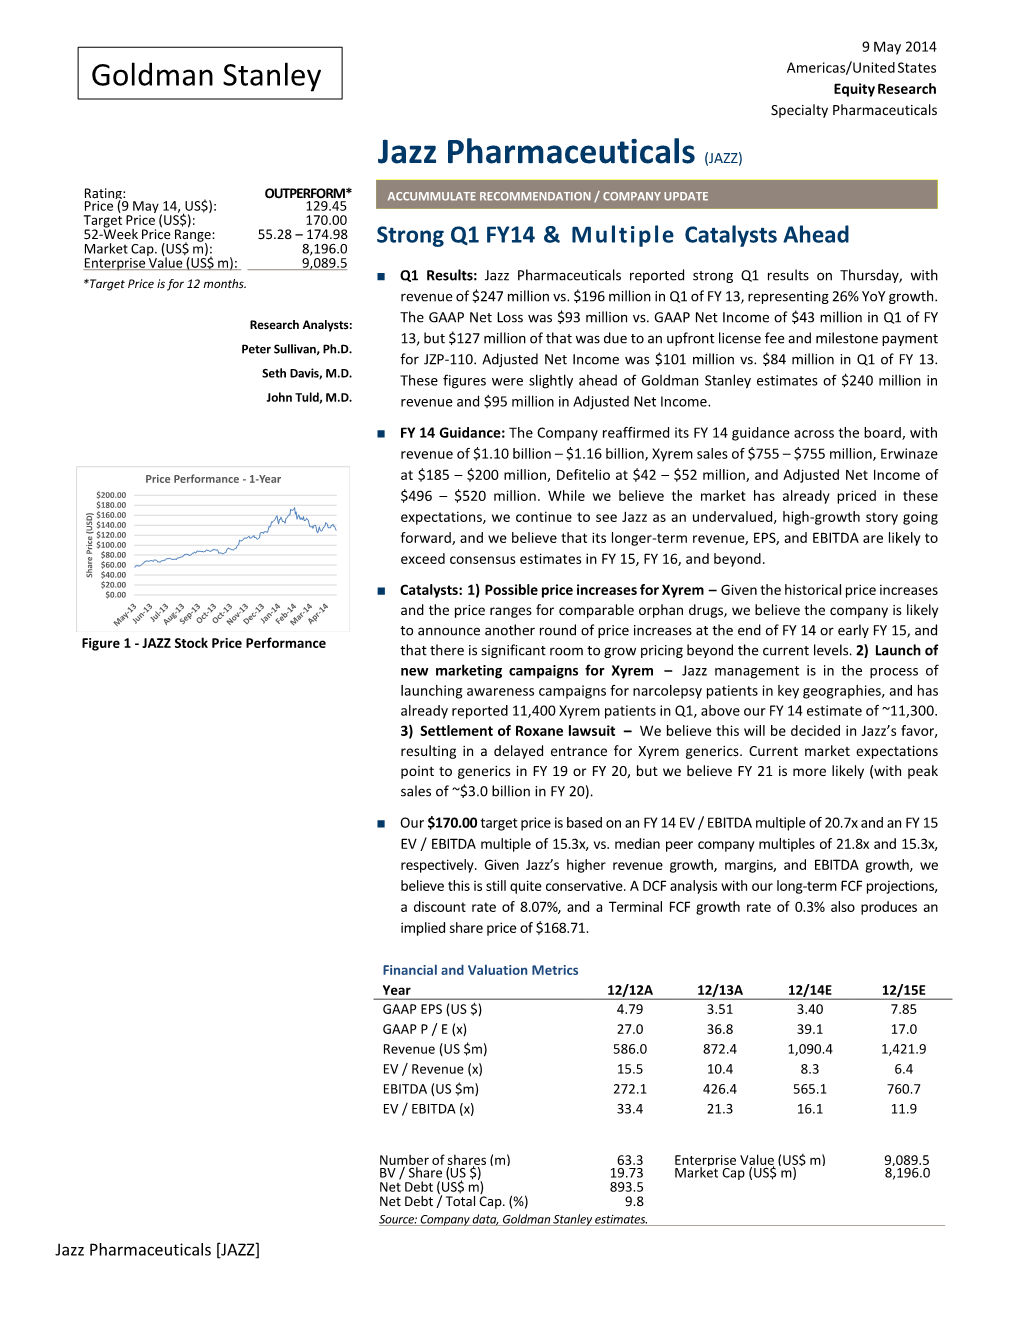 Equity Research Report – Jazz Pharmaceuticals